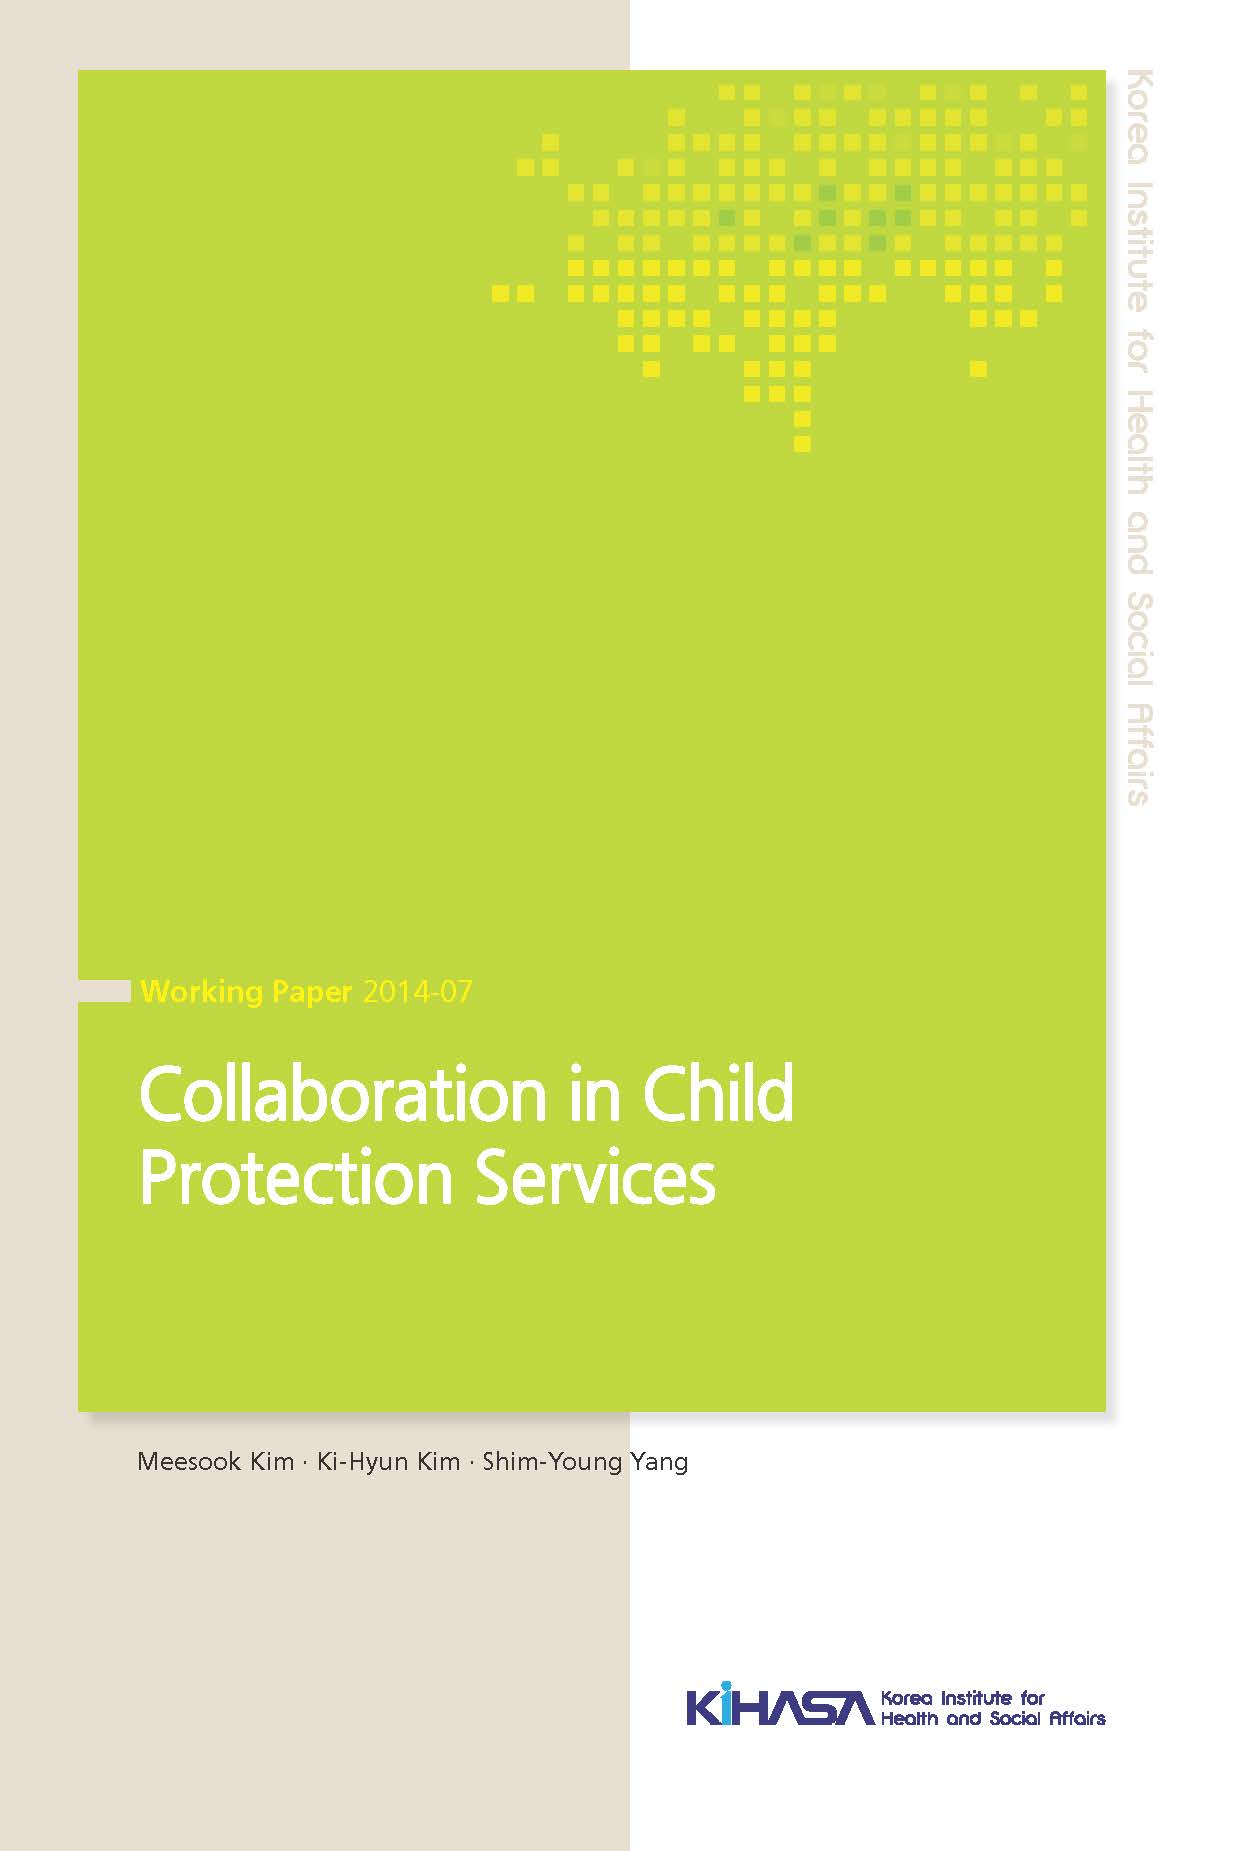 Collaboration in Child Protection Services